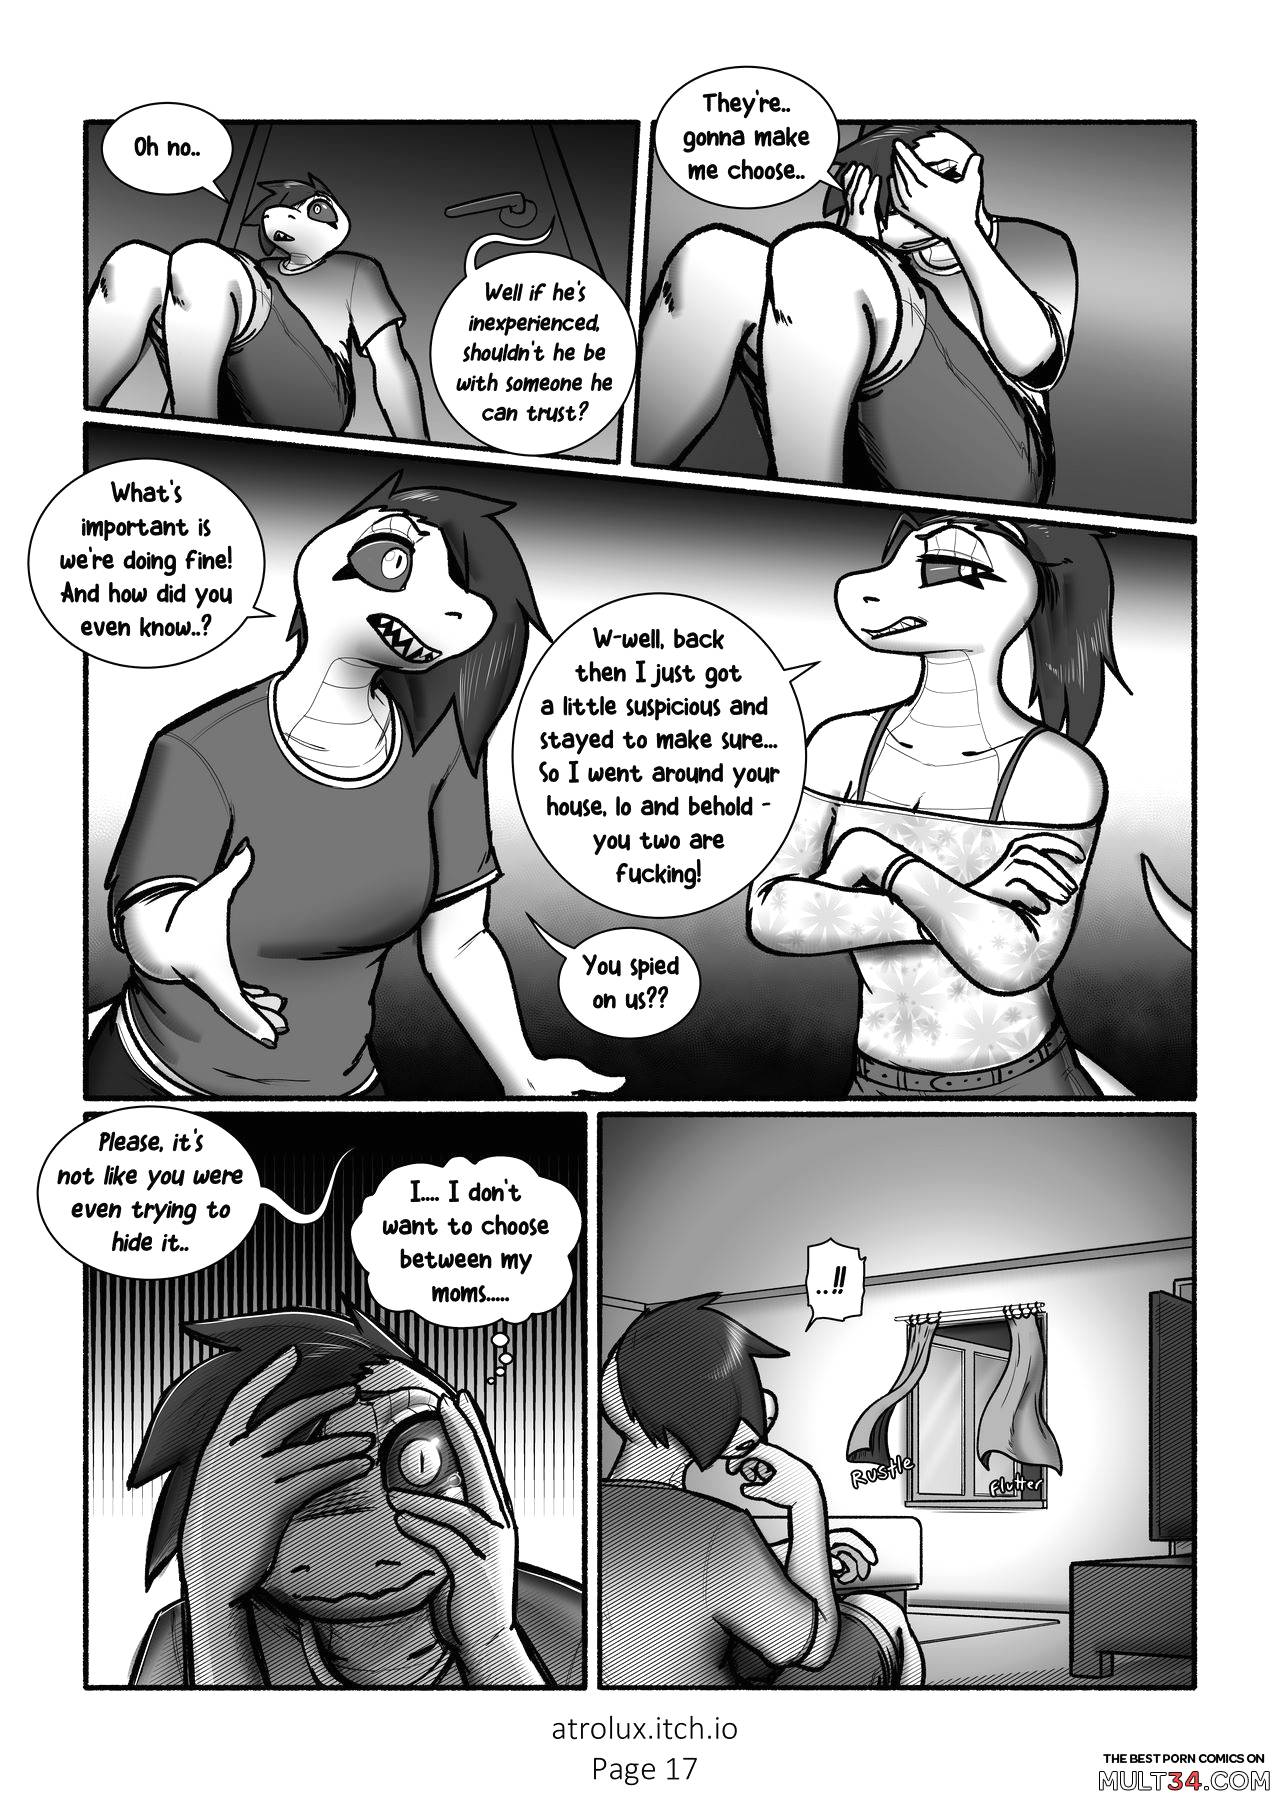 Shedding Inhibitions 6 - Feigned Innocence page 20